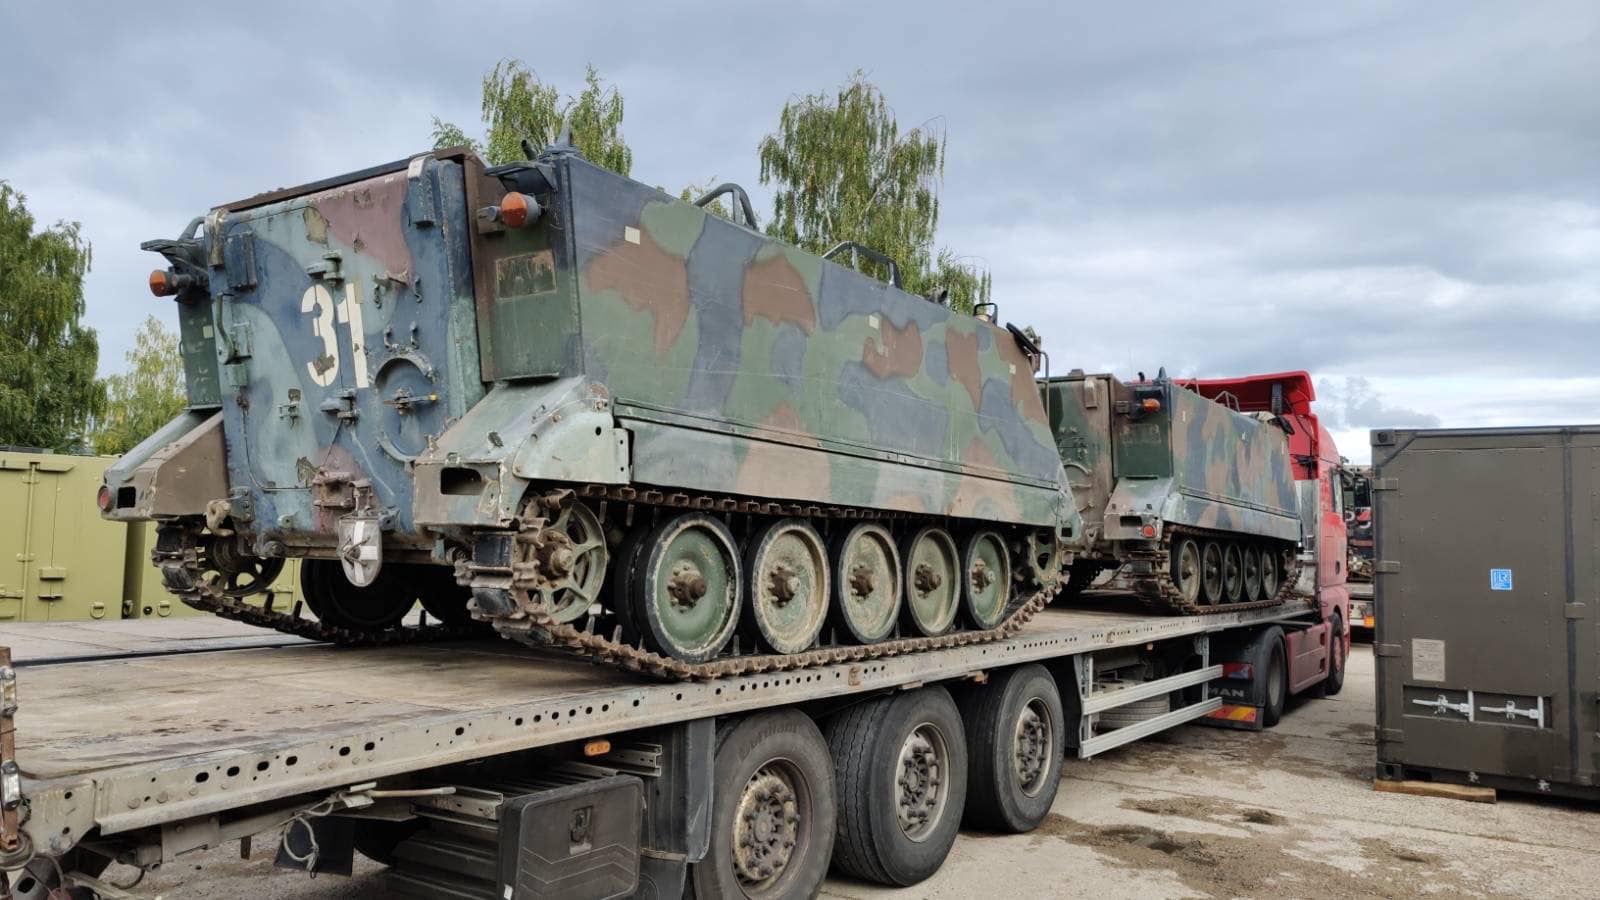 Lithuania took back the Panzerhaubitze 2000 SAU from the AFU for repair and sent an additional batch of M113 tracked armored personnel carriers to Ukraine